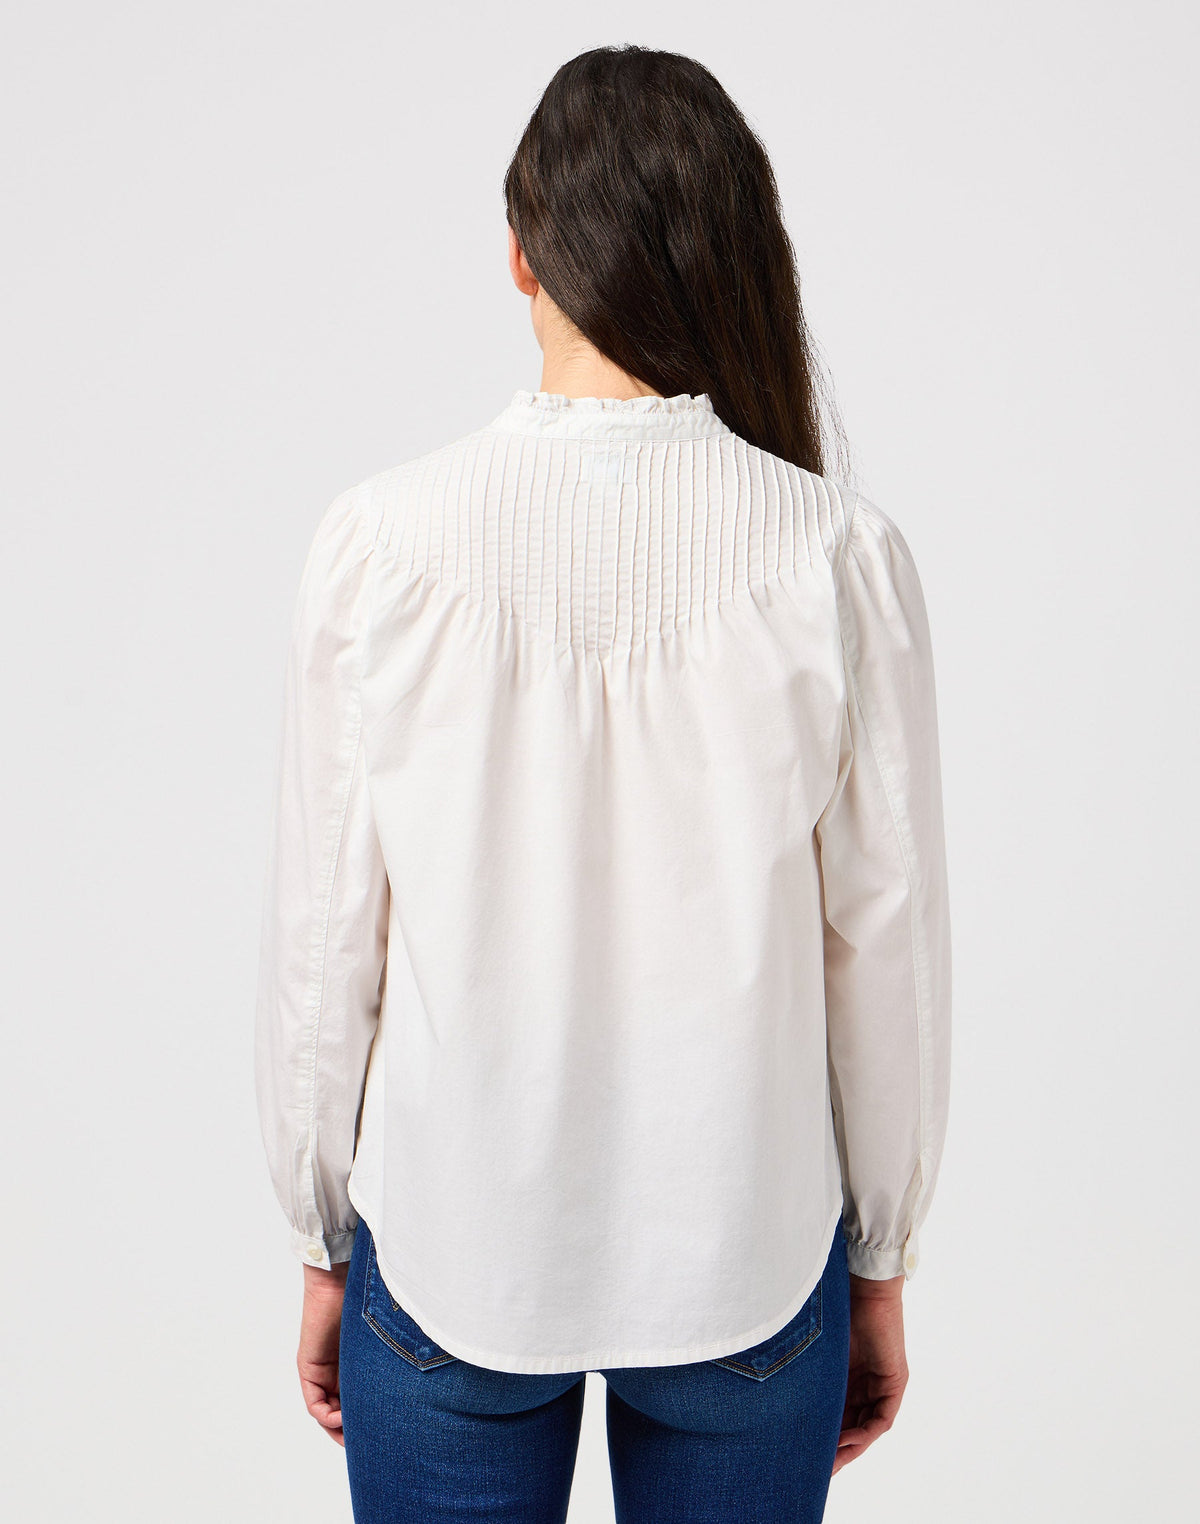 Pintuck Blouse in White